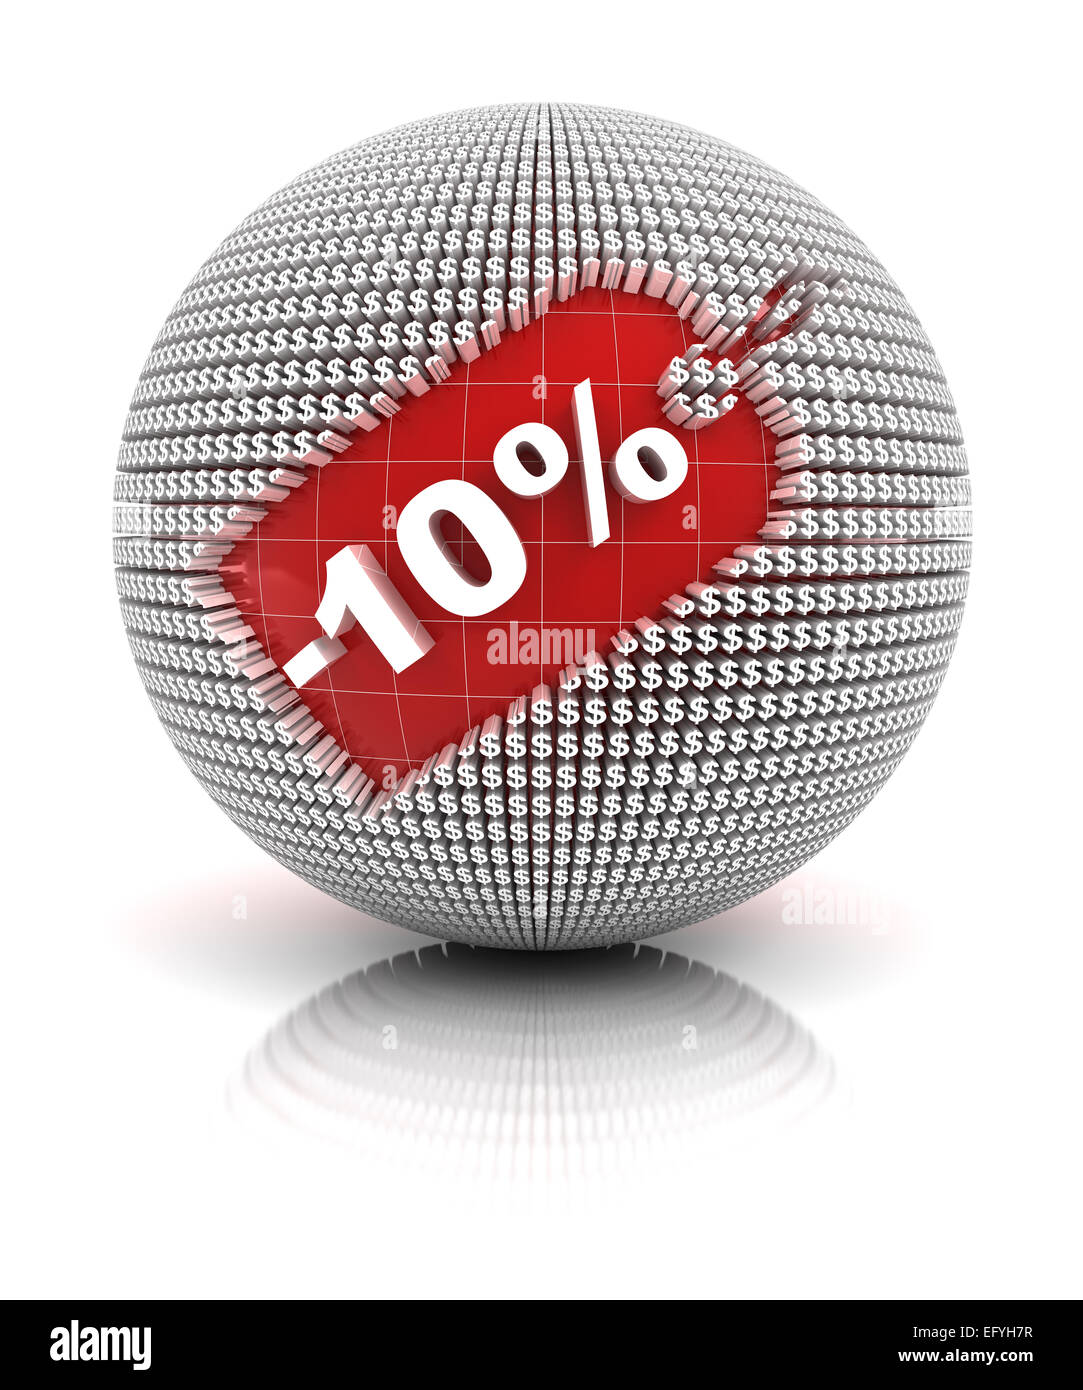 10 percent off sale tag on a sphere Stock Photo